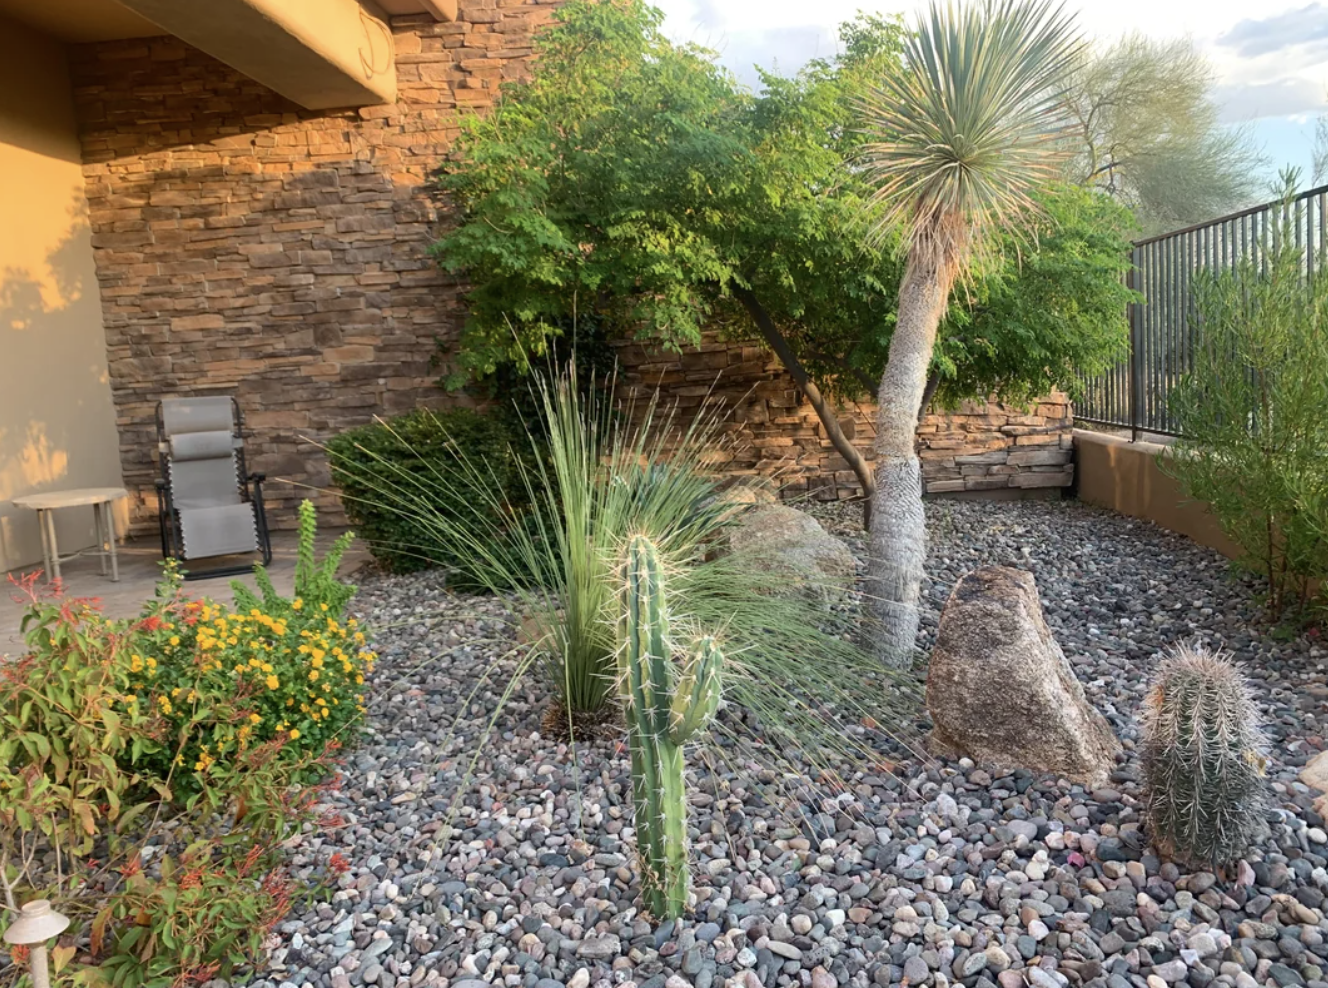 A person showing off their xeriscaped garden, including cacti and other native plants